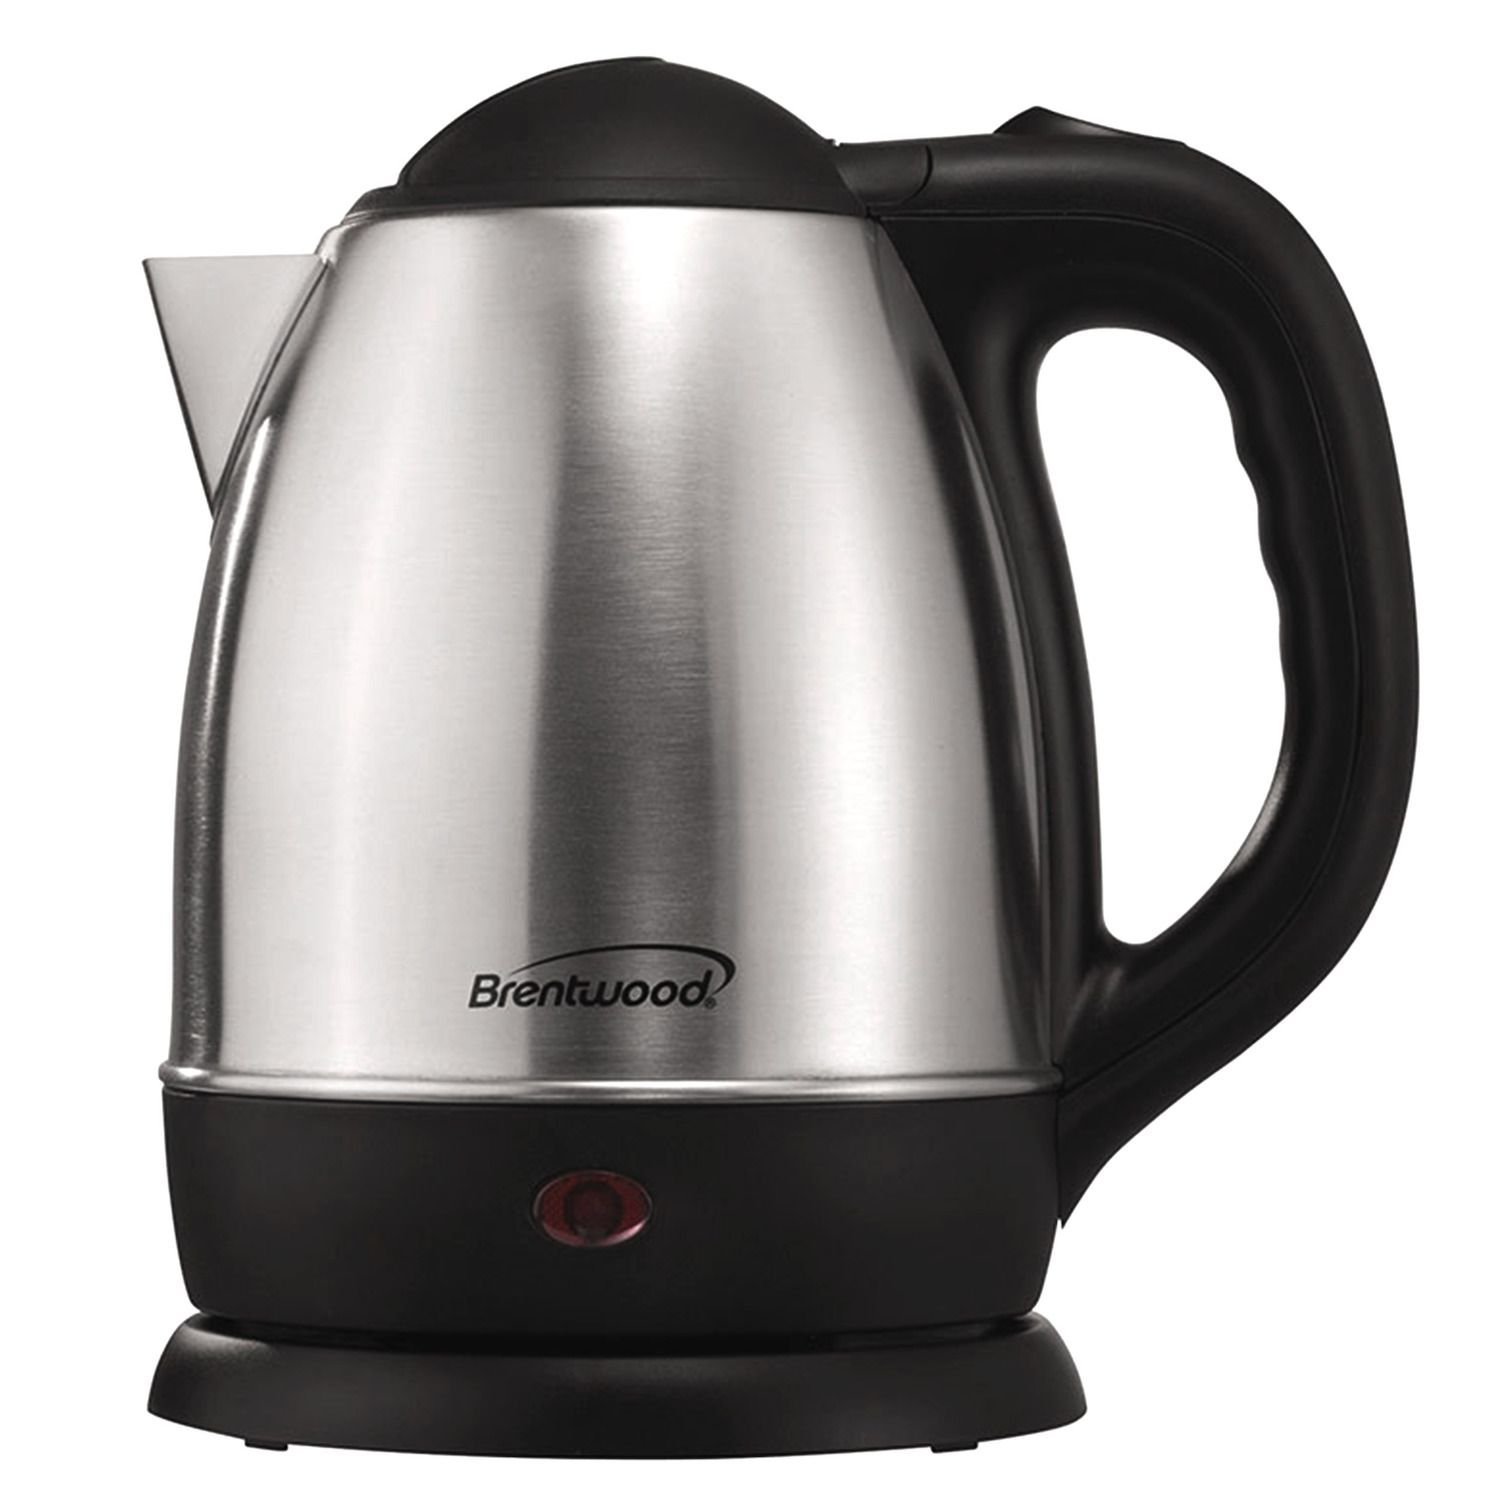  Dash Insulated Electric Kettle, Cordless Hot Water